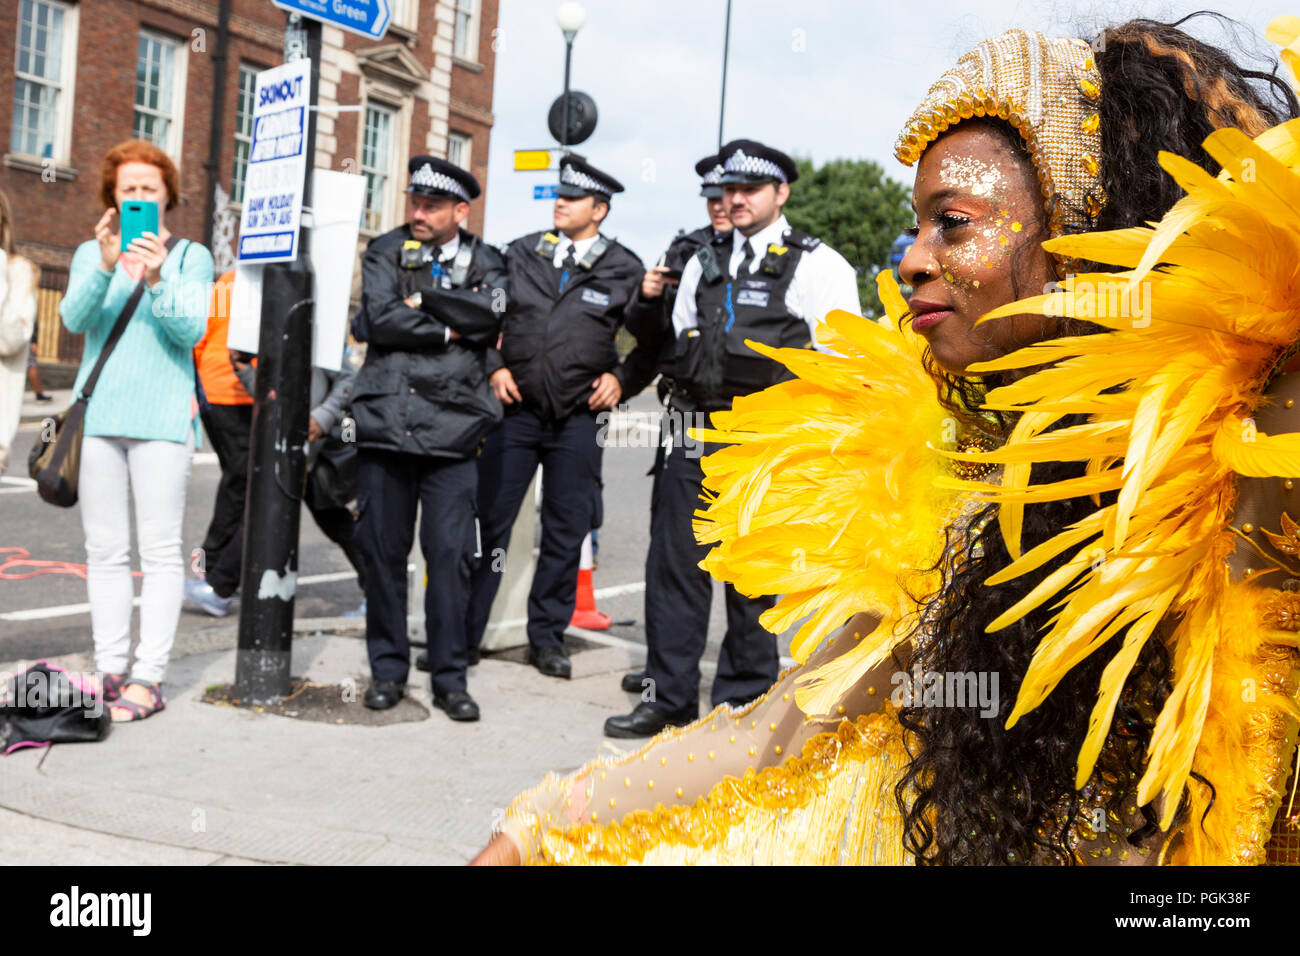 London, United Kingdom. 27 August 2018. Dancer and police officers at Notting Hill Carnival, Europe's largest street party.  Photo: Bettina Strenske/Alamy Live News Stock Photo